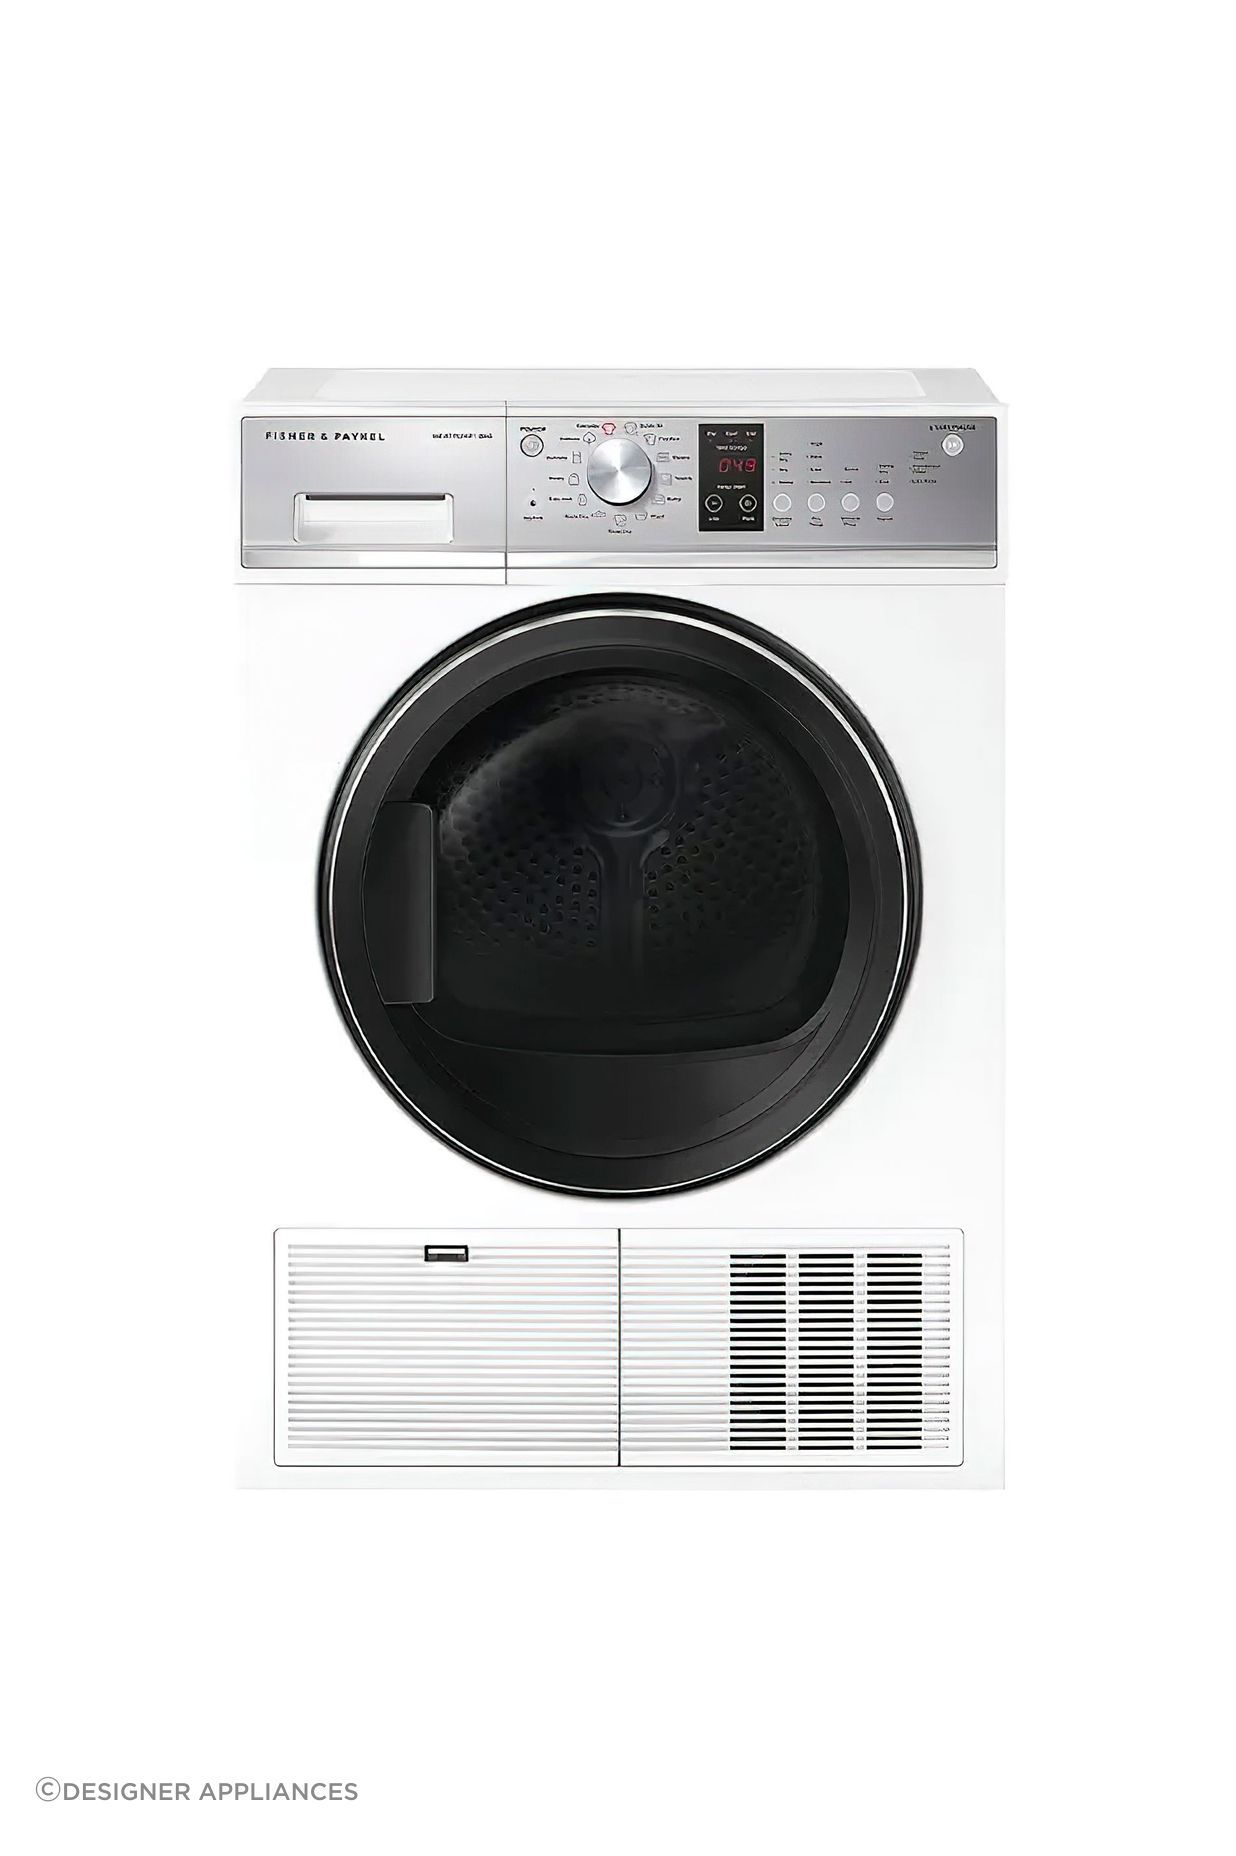 The Fisher &amp; Paykel 8kg Heat Pump Dryer in White from Designer Appliances